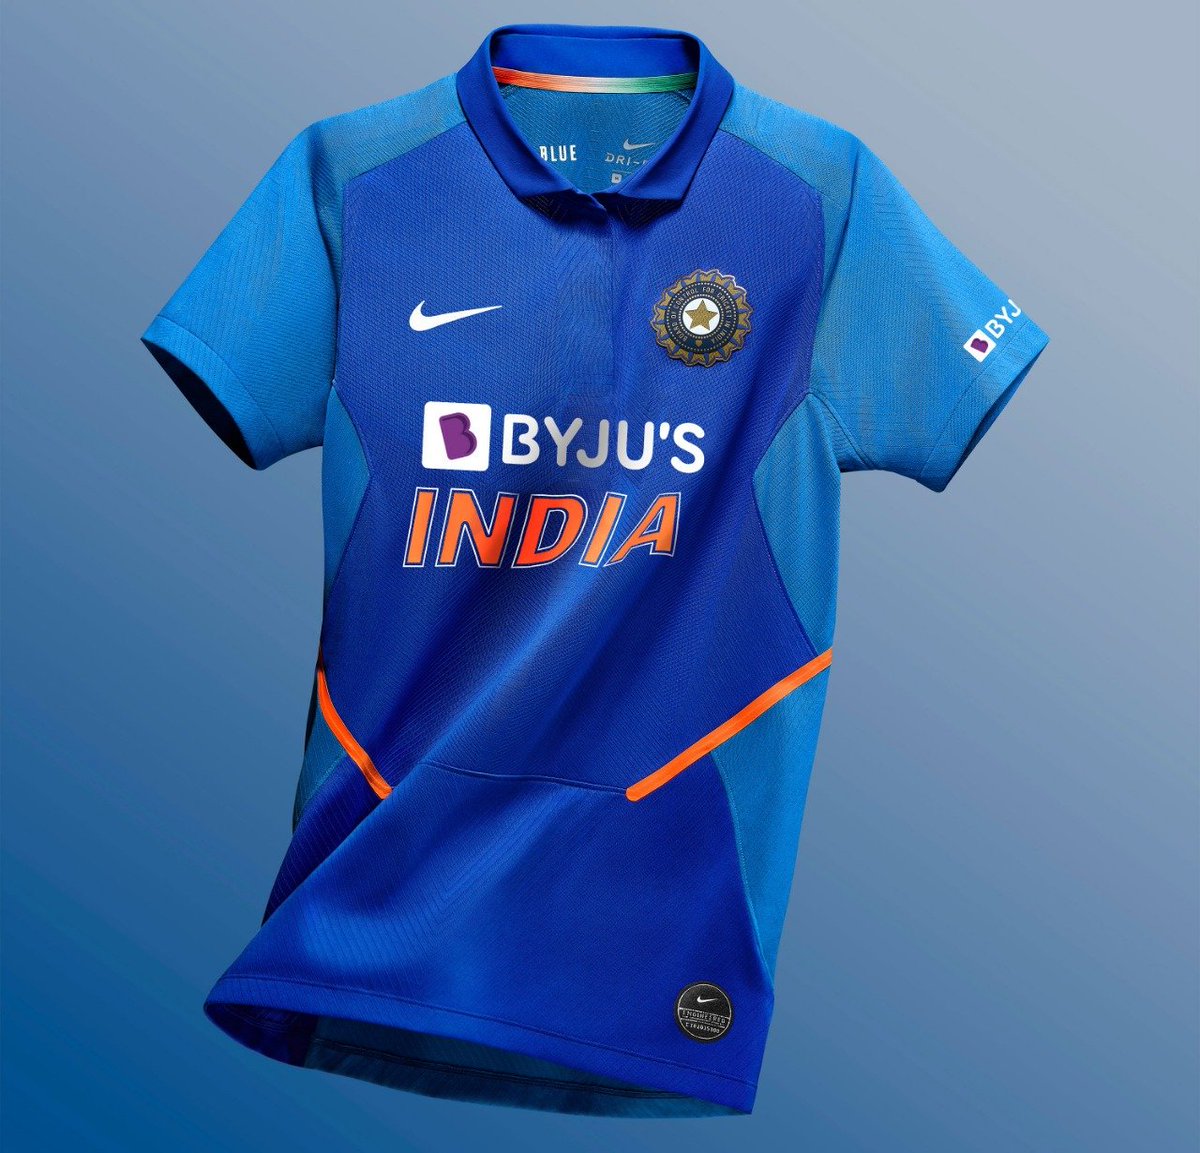 away jersey for indian cricket team